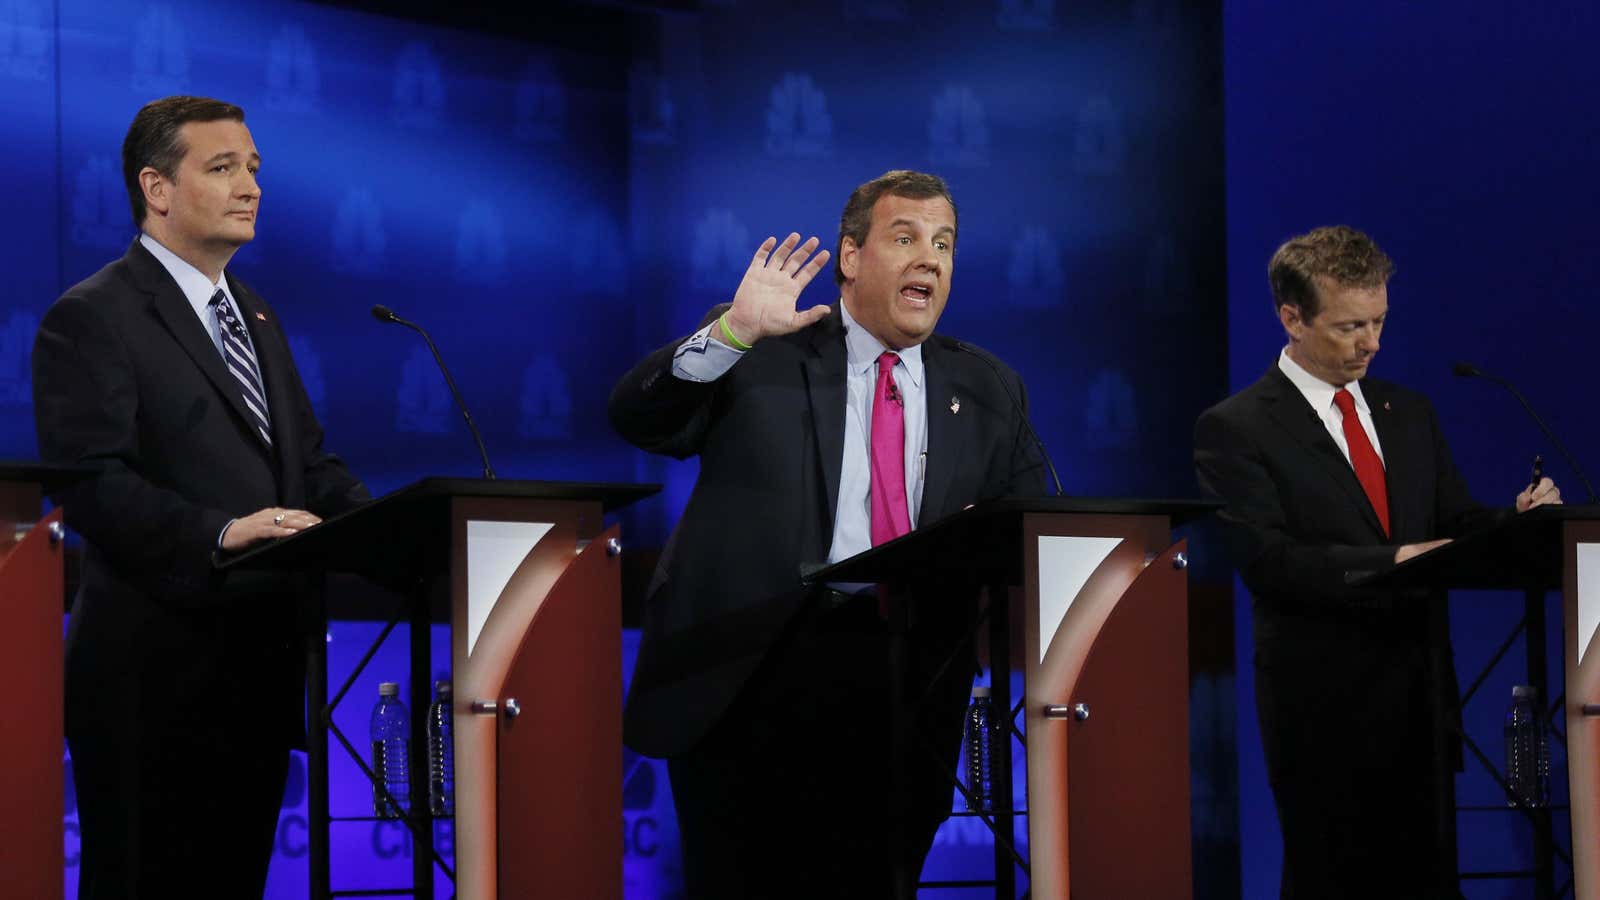 Candidates Ted Cruz, Chris Christie, and Rand Paul air their feelings on the US media at the third GOP debate.